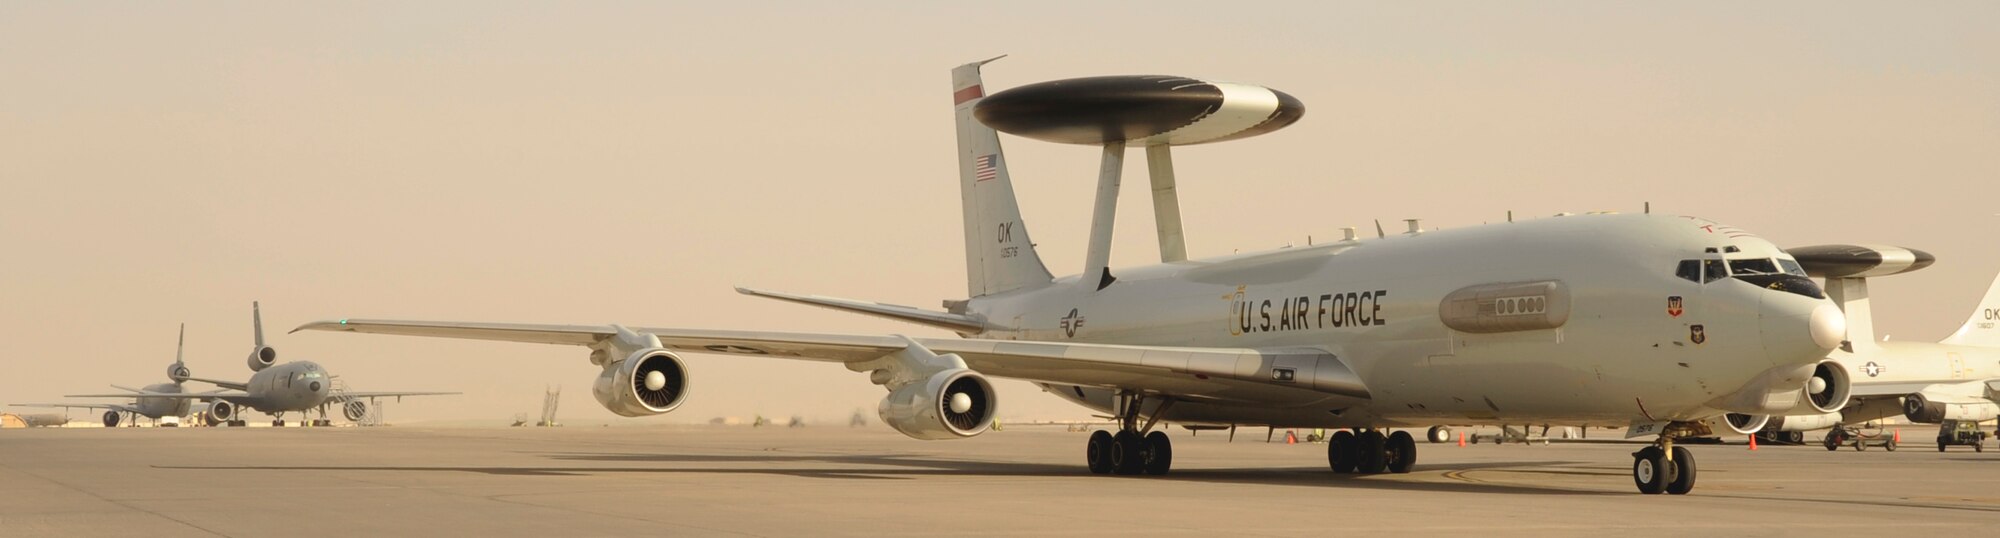 An E-3 Sentry taxis into place after a sortie May 25, 2017, at an undisclosed location in southwest Asia. The E-3 Sentry houses the Airborne Warning and Control System which provides situational awareness, command and control, battle management, surveillance and early warning of friendly, neutral and hostile activity during joint, allied, and coalition operations. (U.S. Air Force photo by Senior Airman Preston Webb)